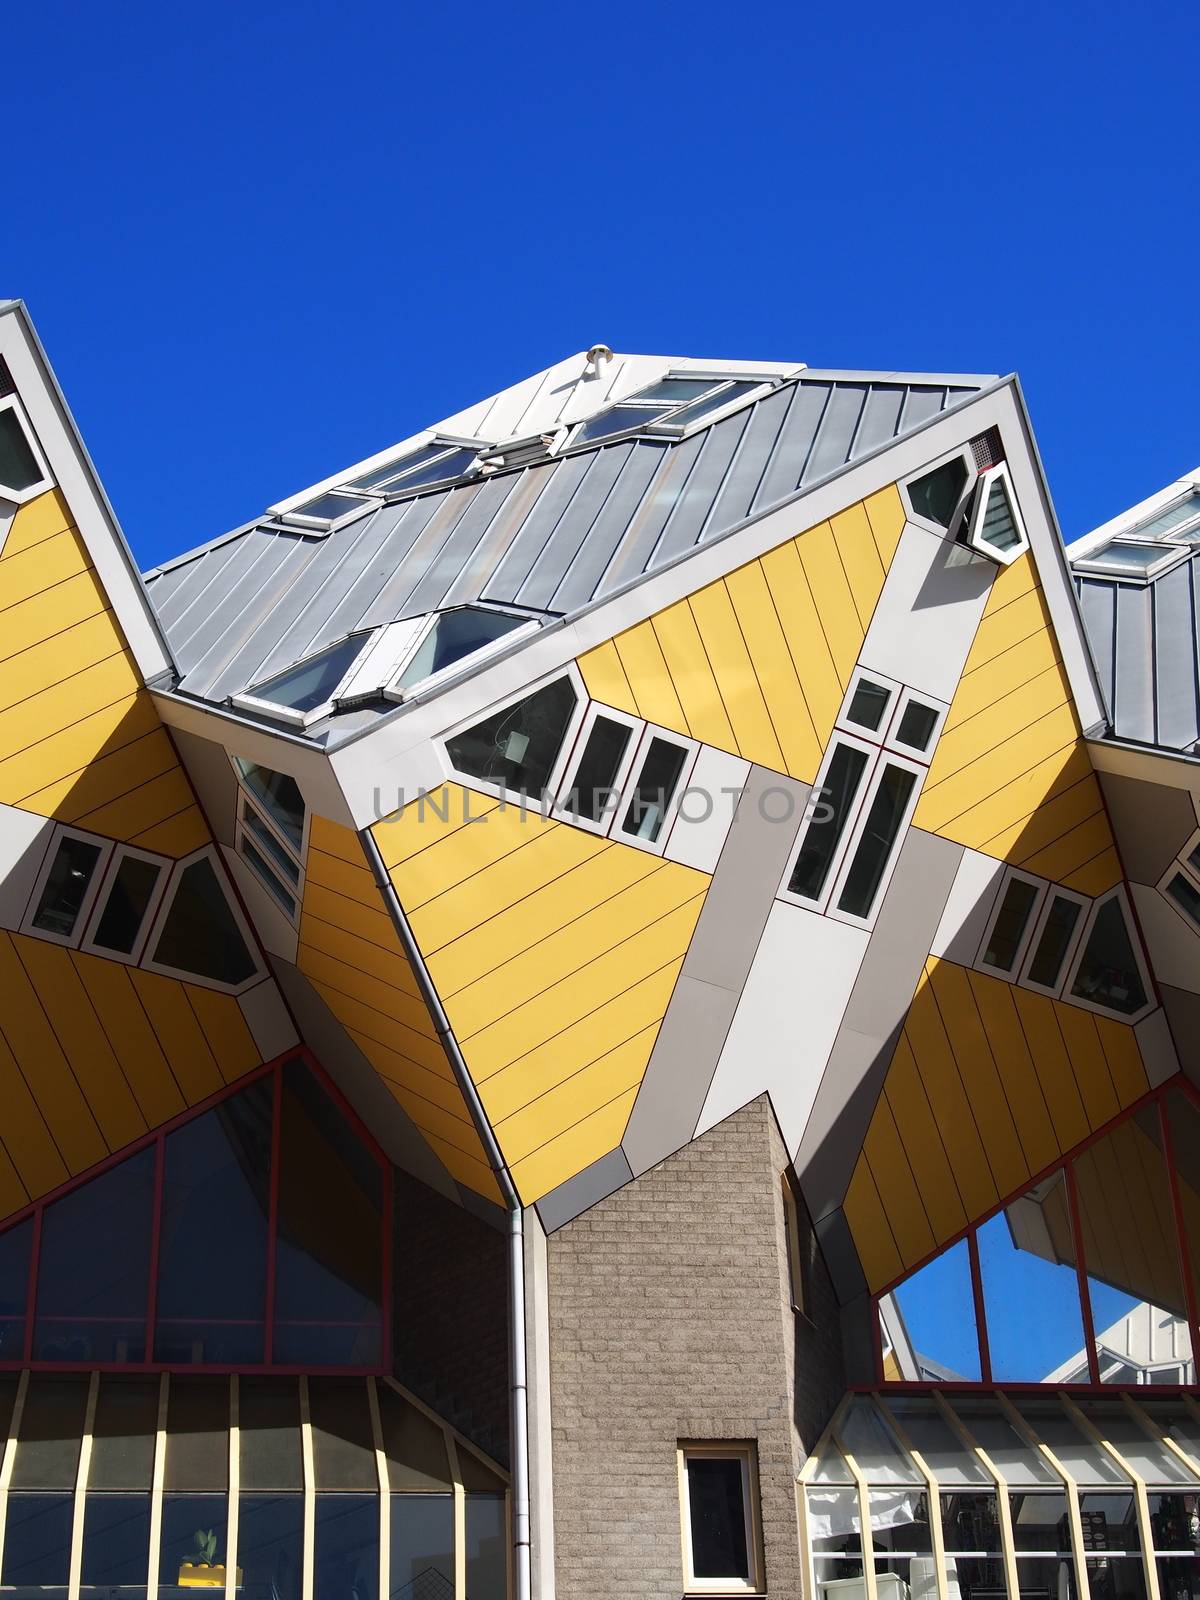 The yellow cube houses in Rotterdam. Netherlands. by douwe